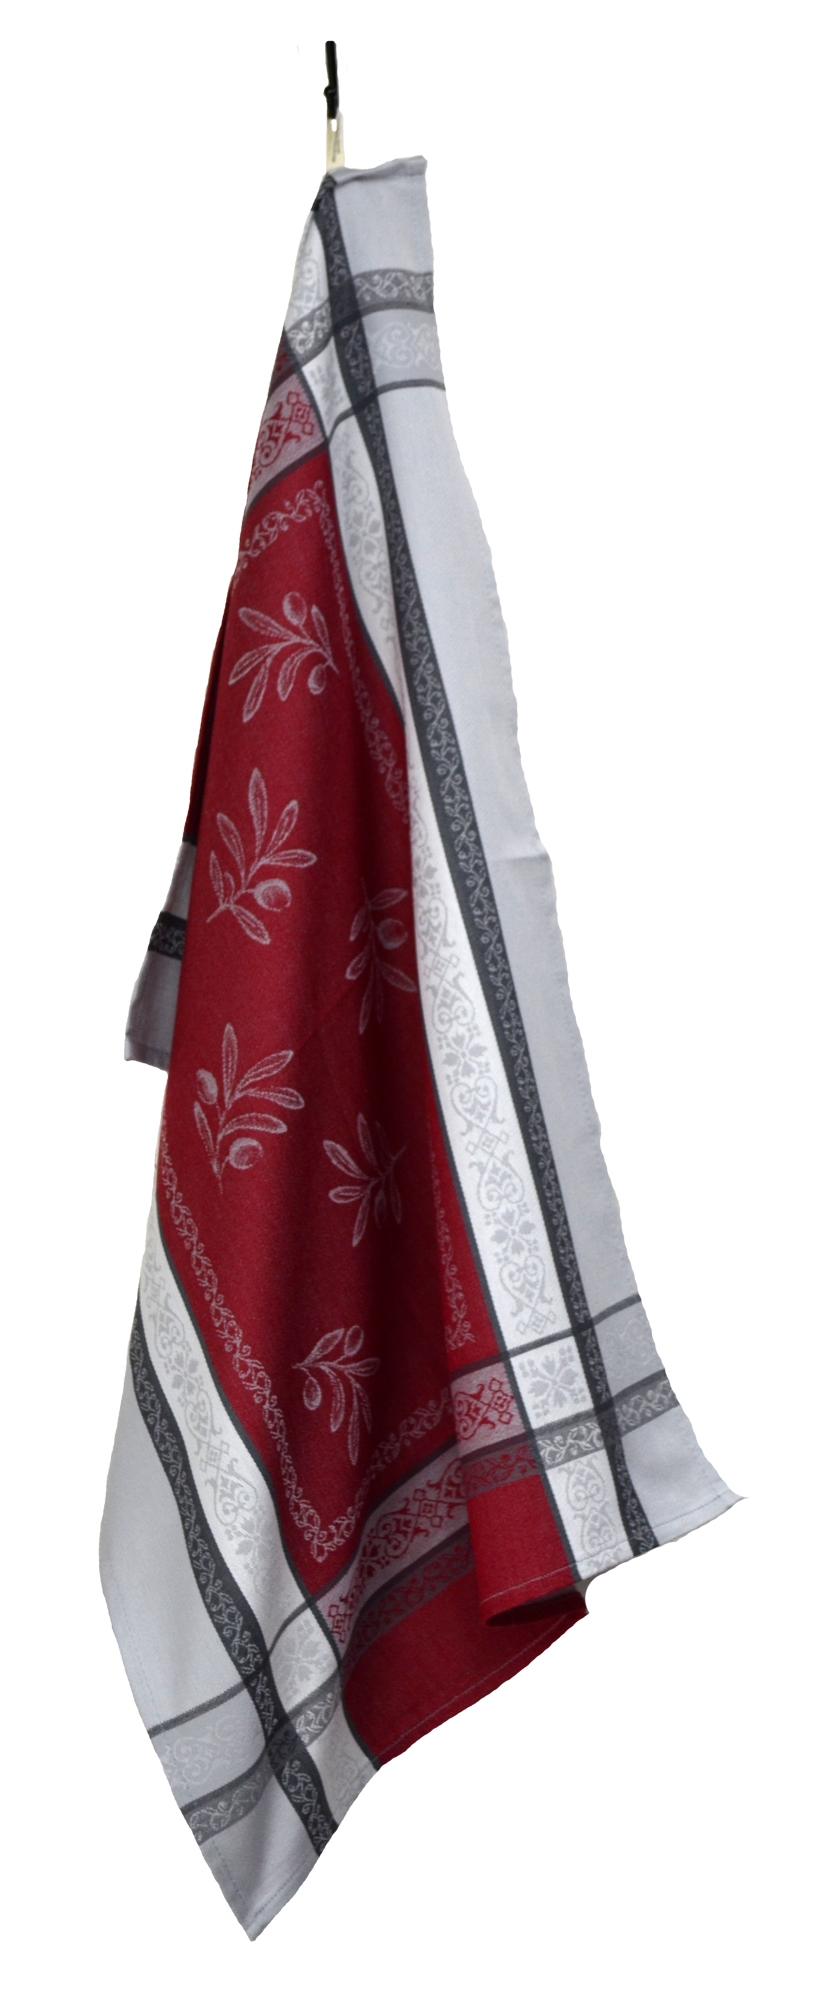 Olives French Jacquard Tea Towel - Collection "Olivia" Red/Grey, Size: 21 x 29 inches, Price CAN$19.95